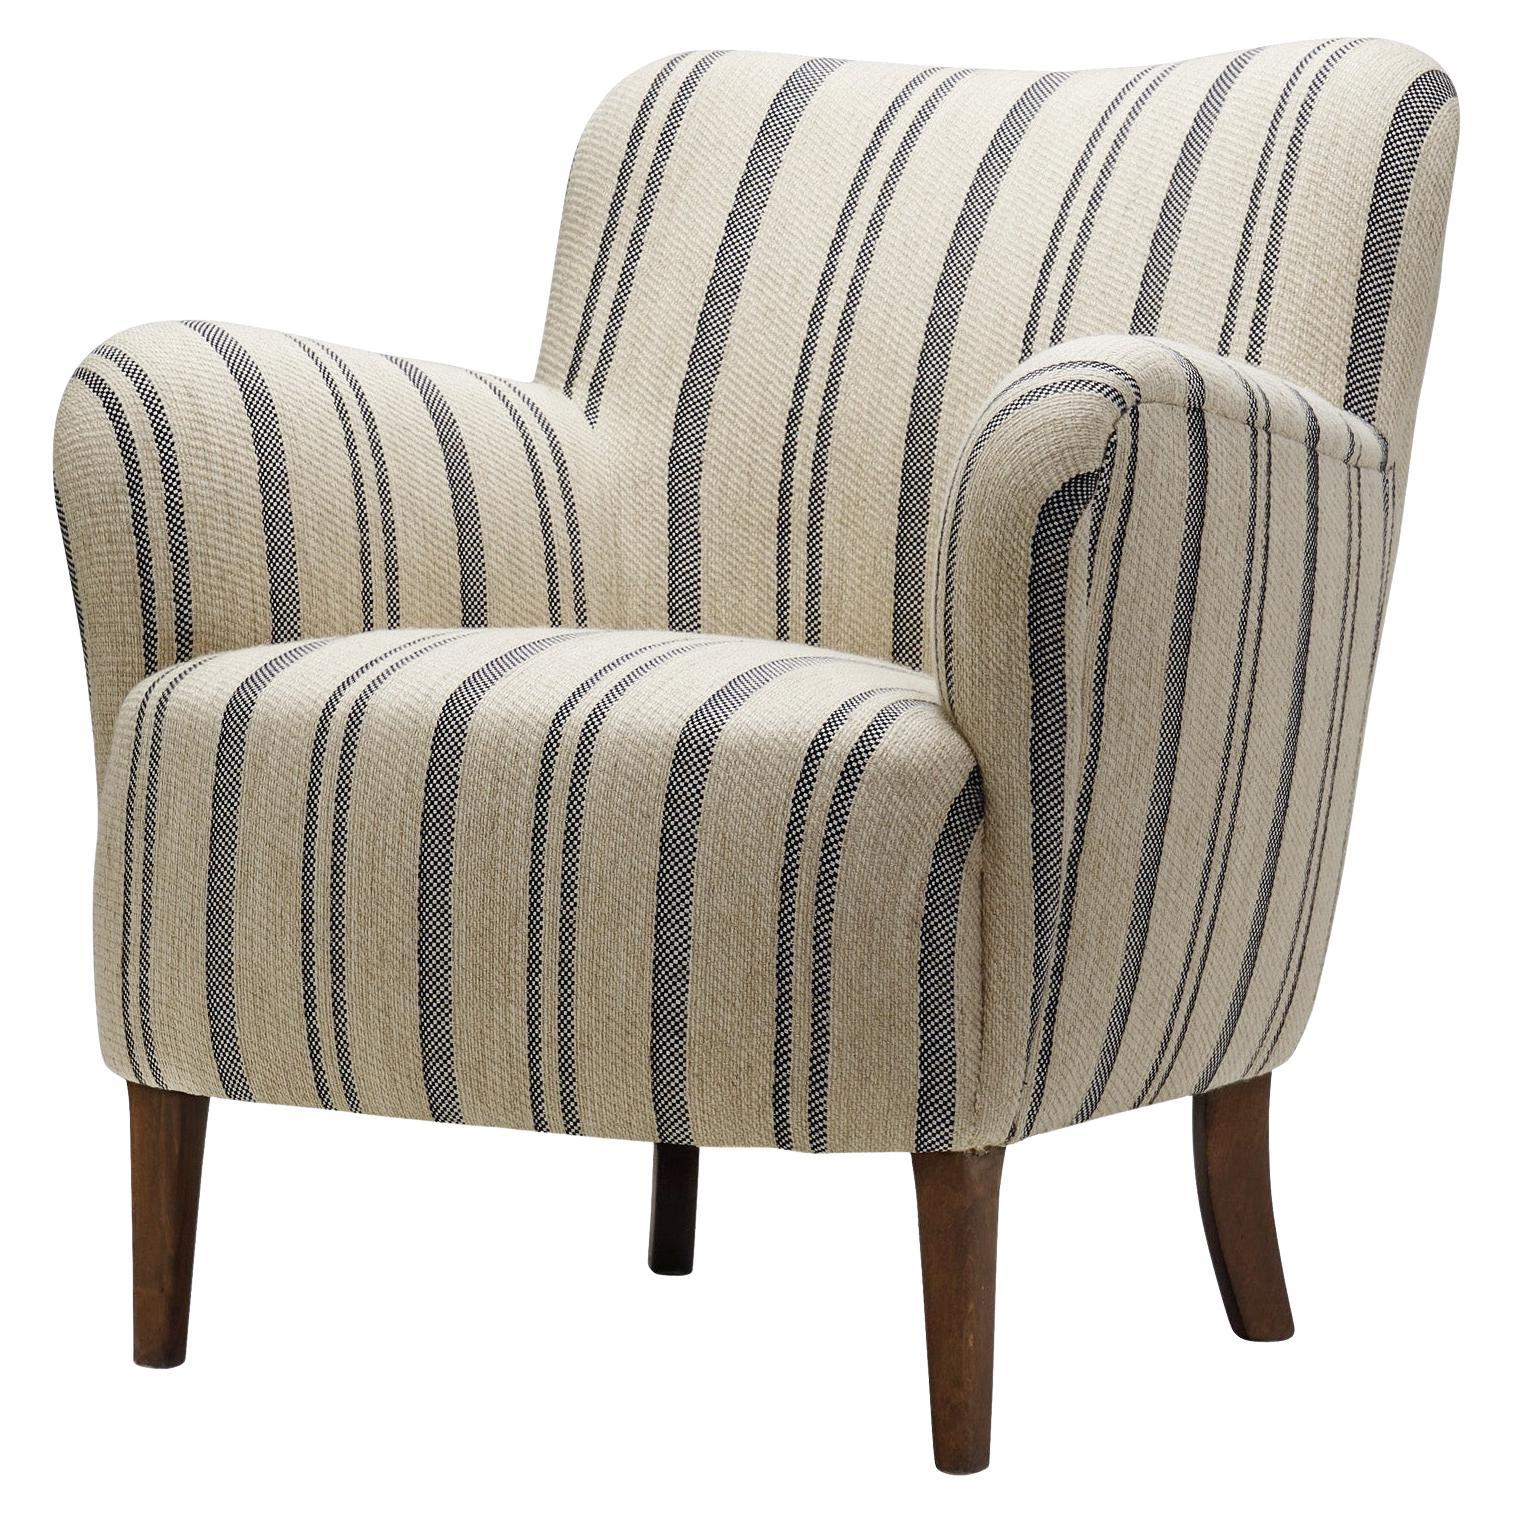 Mid-Century Modern Striped Lowback Easy Chair, Denmark ca 1940s For Sale